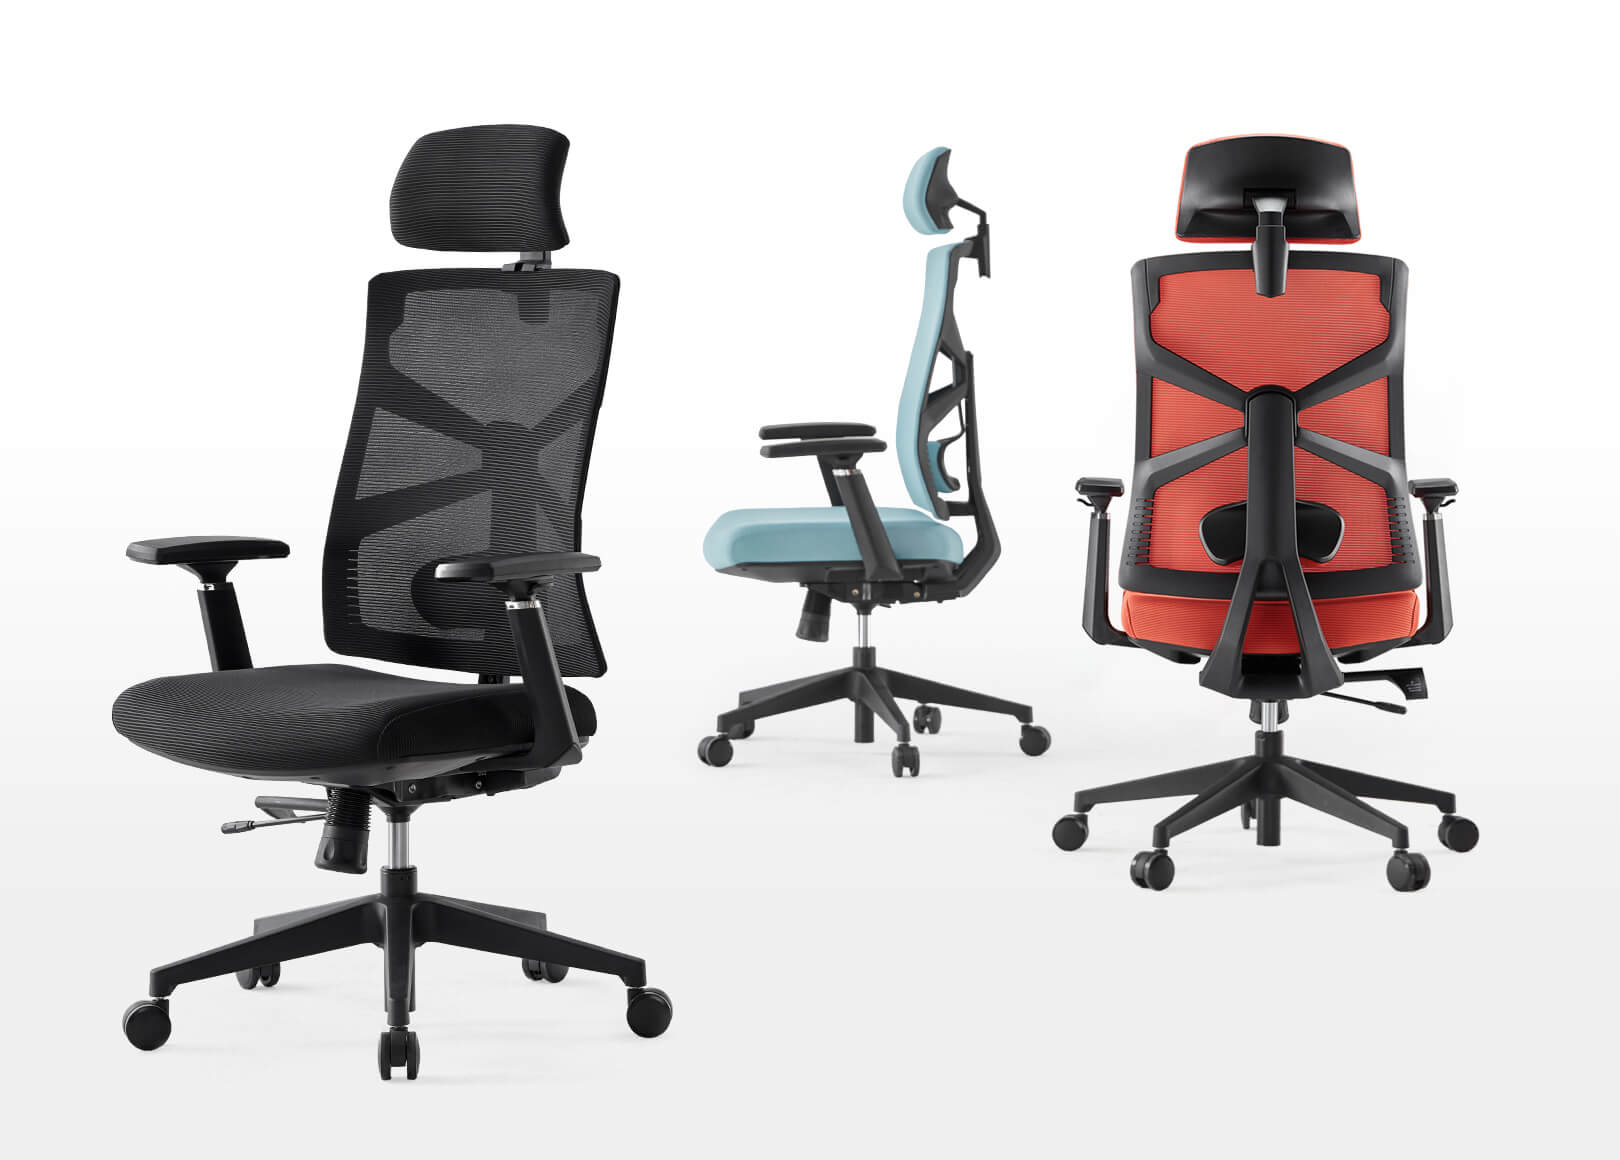 Ergonomic Desk Chairs Voyager Pro Chairs in Orange, Cyan and Black  with Adjustable Seat Depth and Tilt Tension